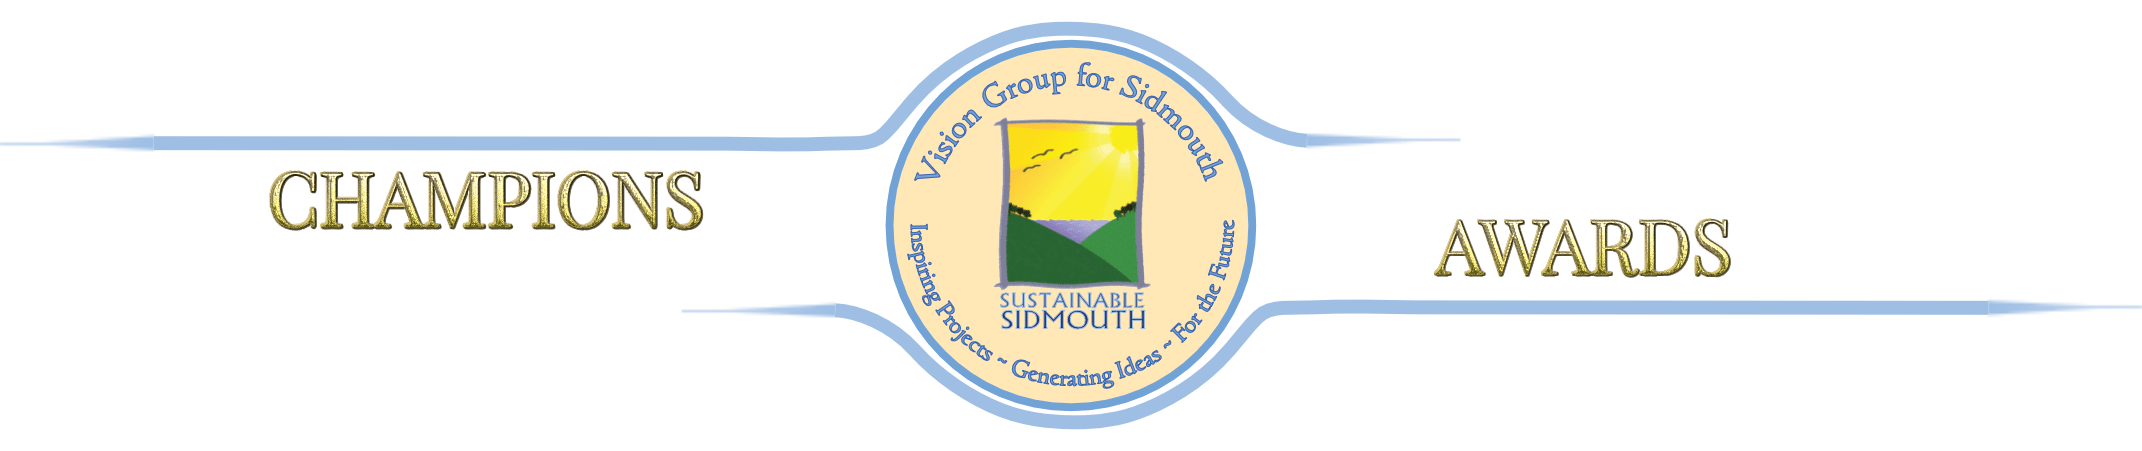 Sustainable Sidmouth Champions Awards